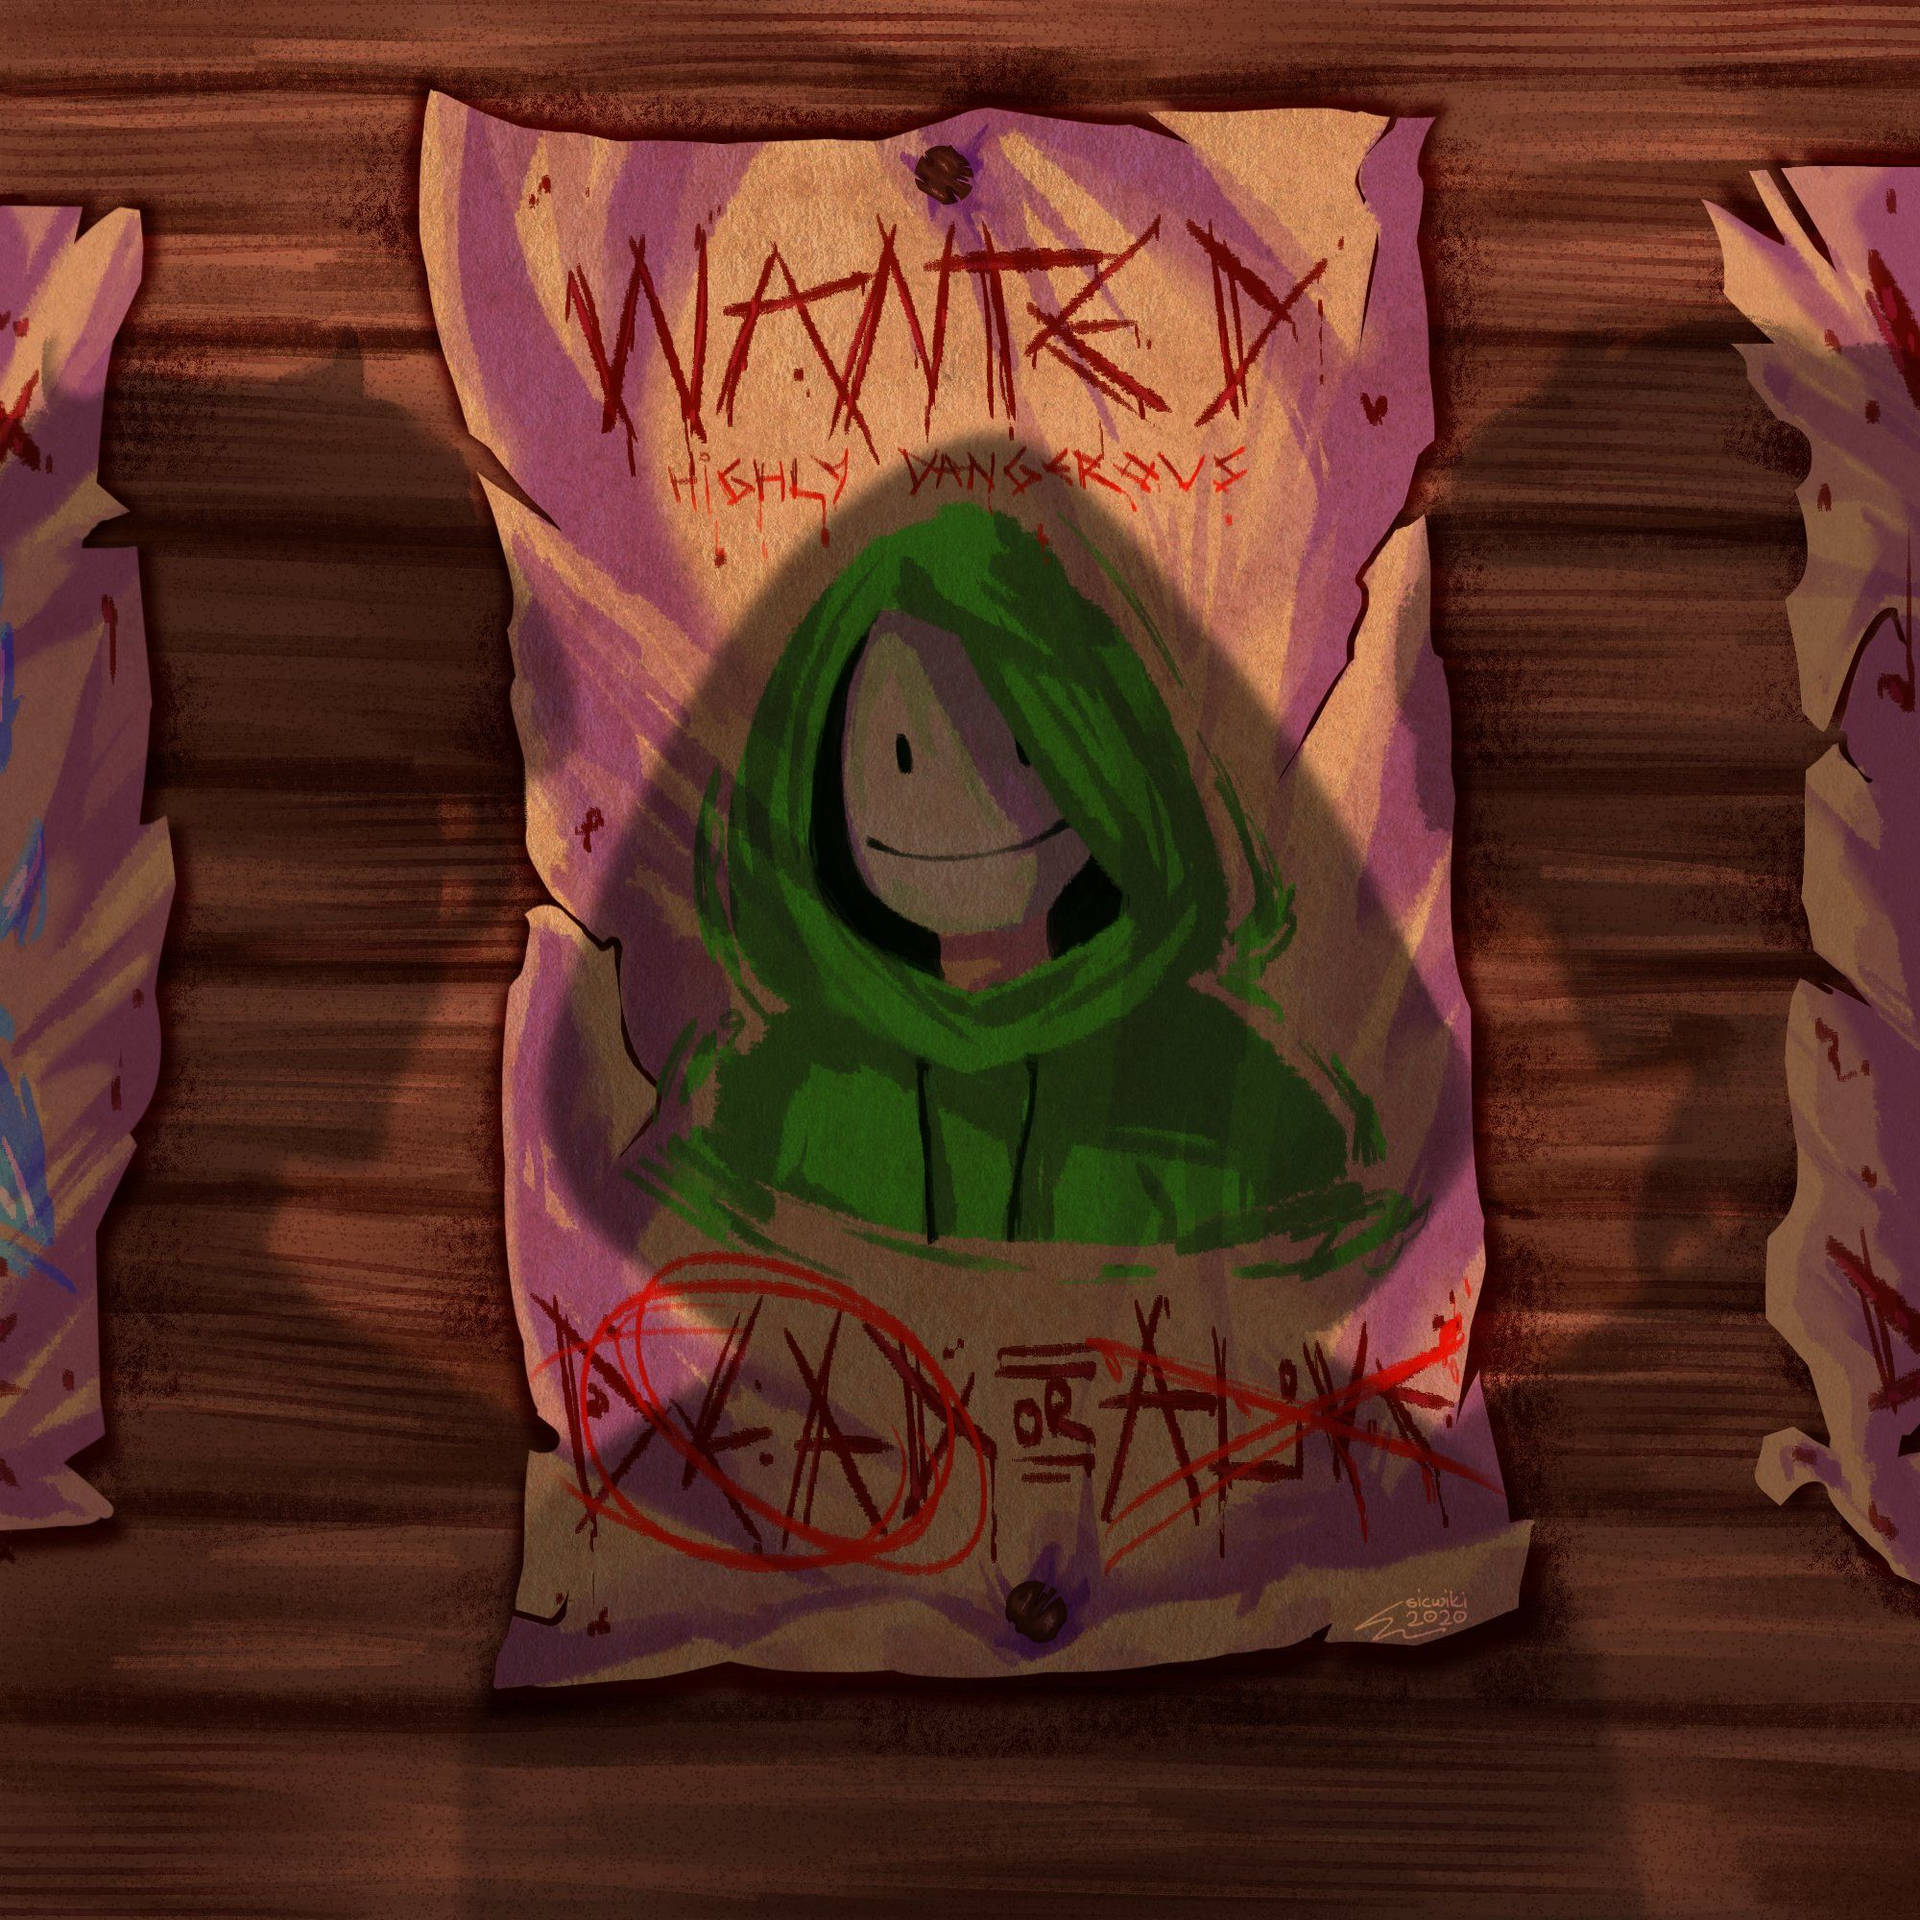 Dreamnotfound Wanted Poster Wallpaper